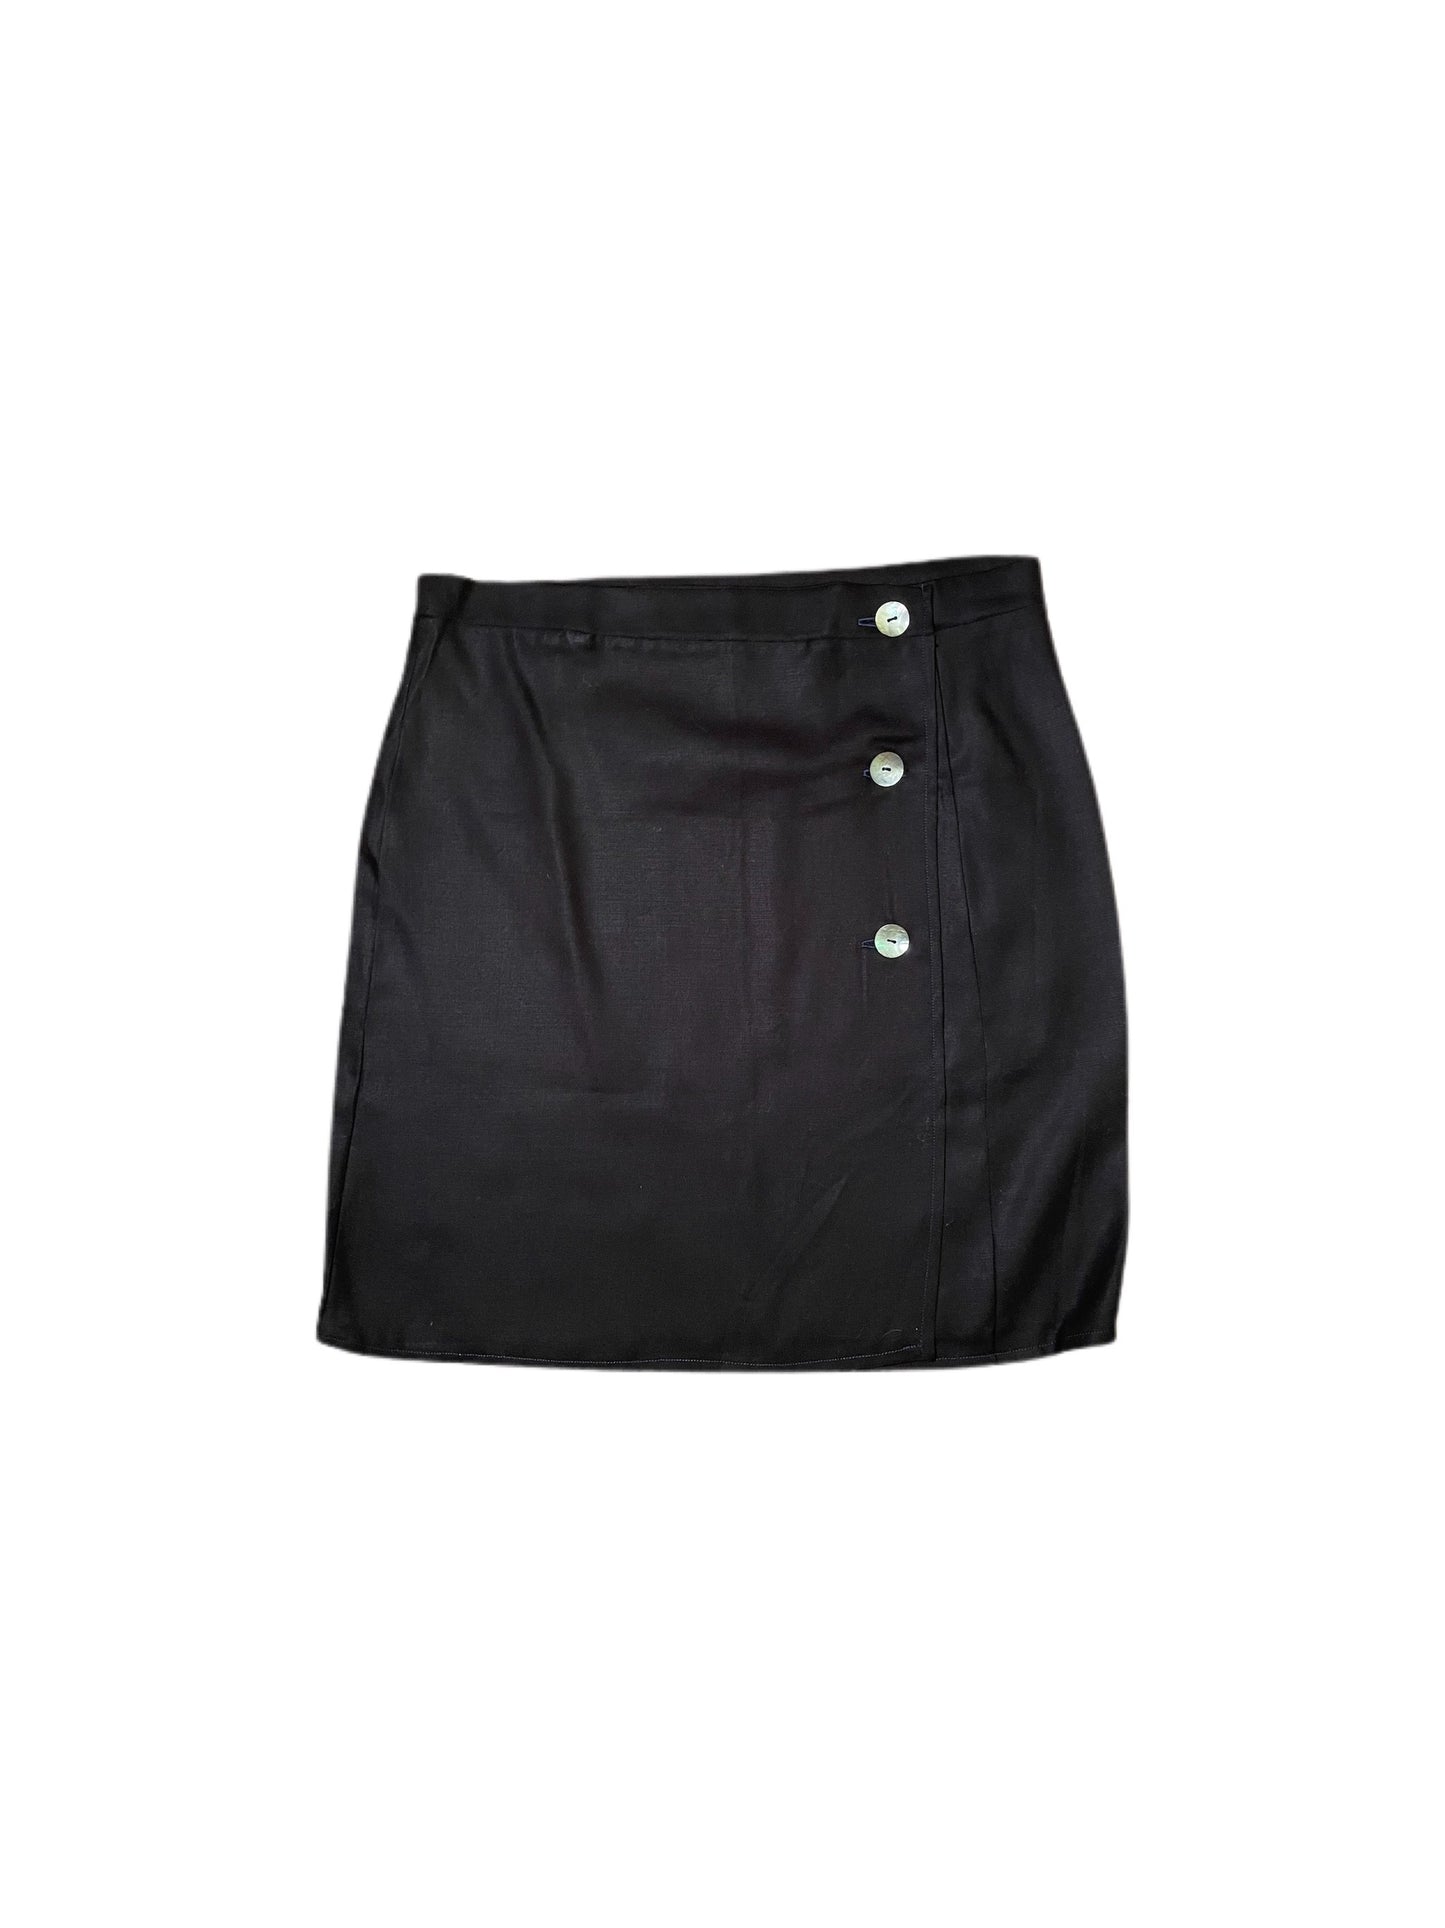 Wrap Skirt Product Front | Beatrice Bayliss